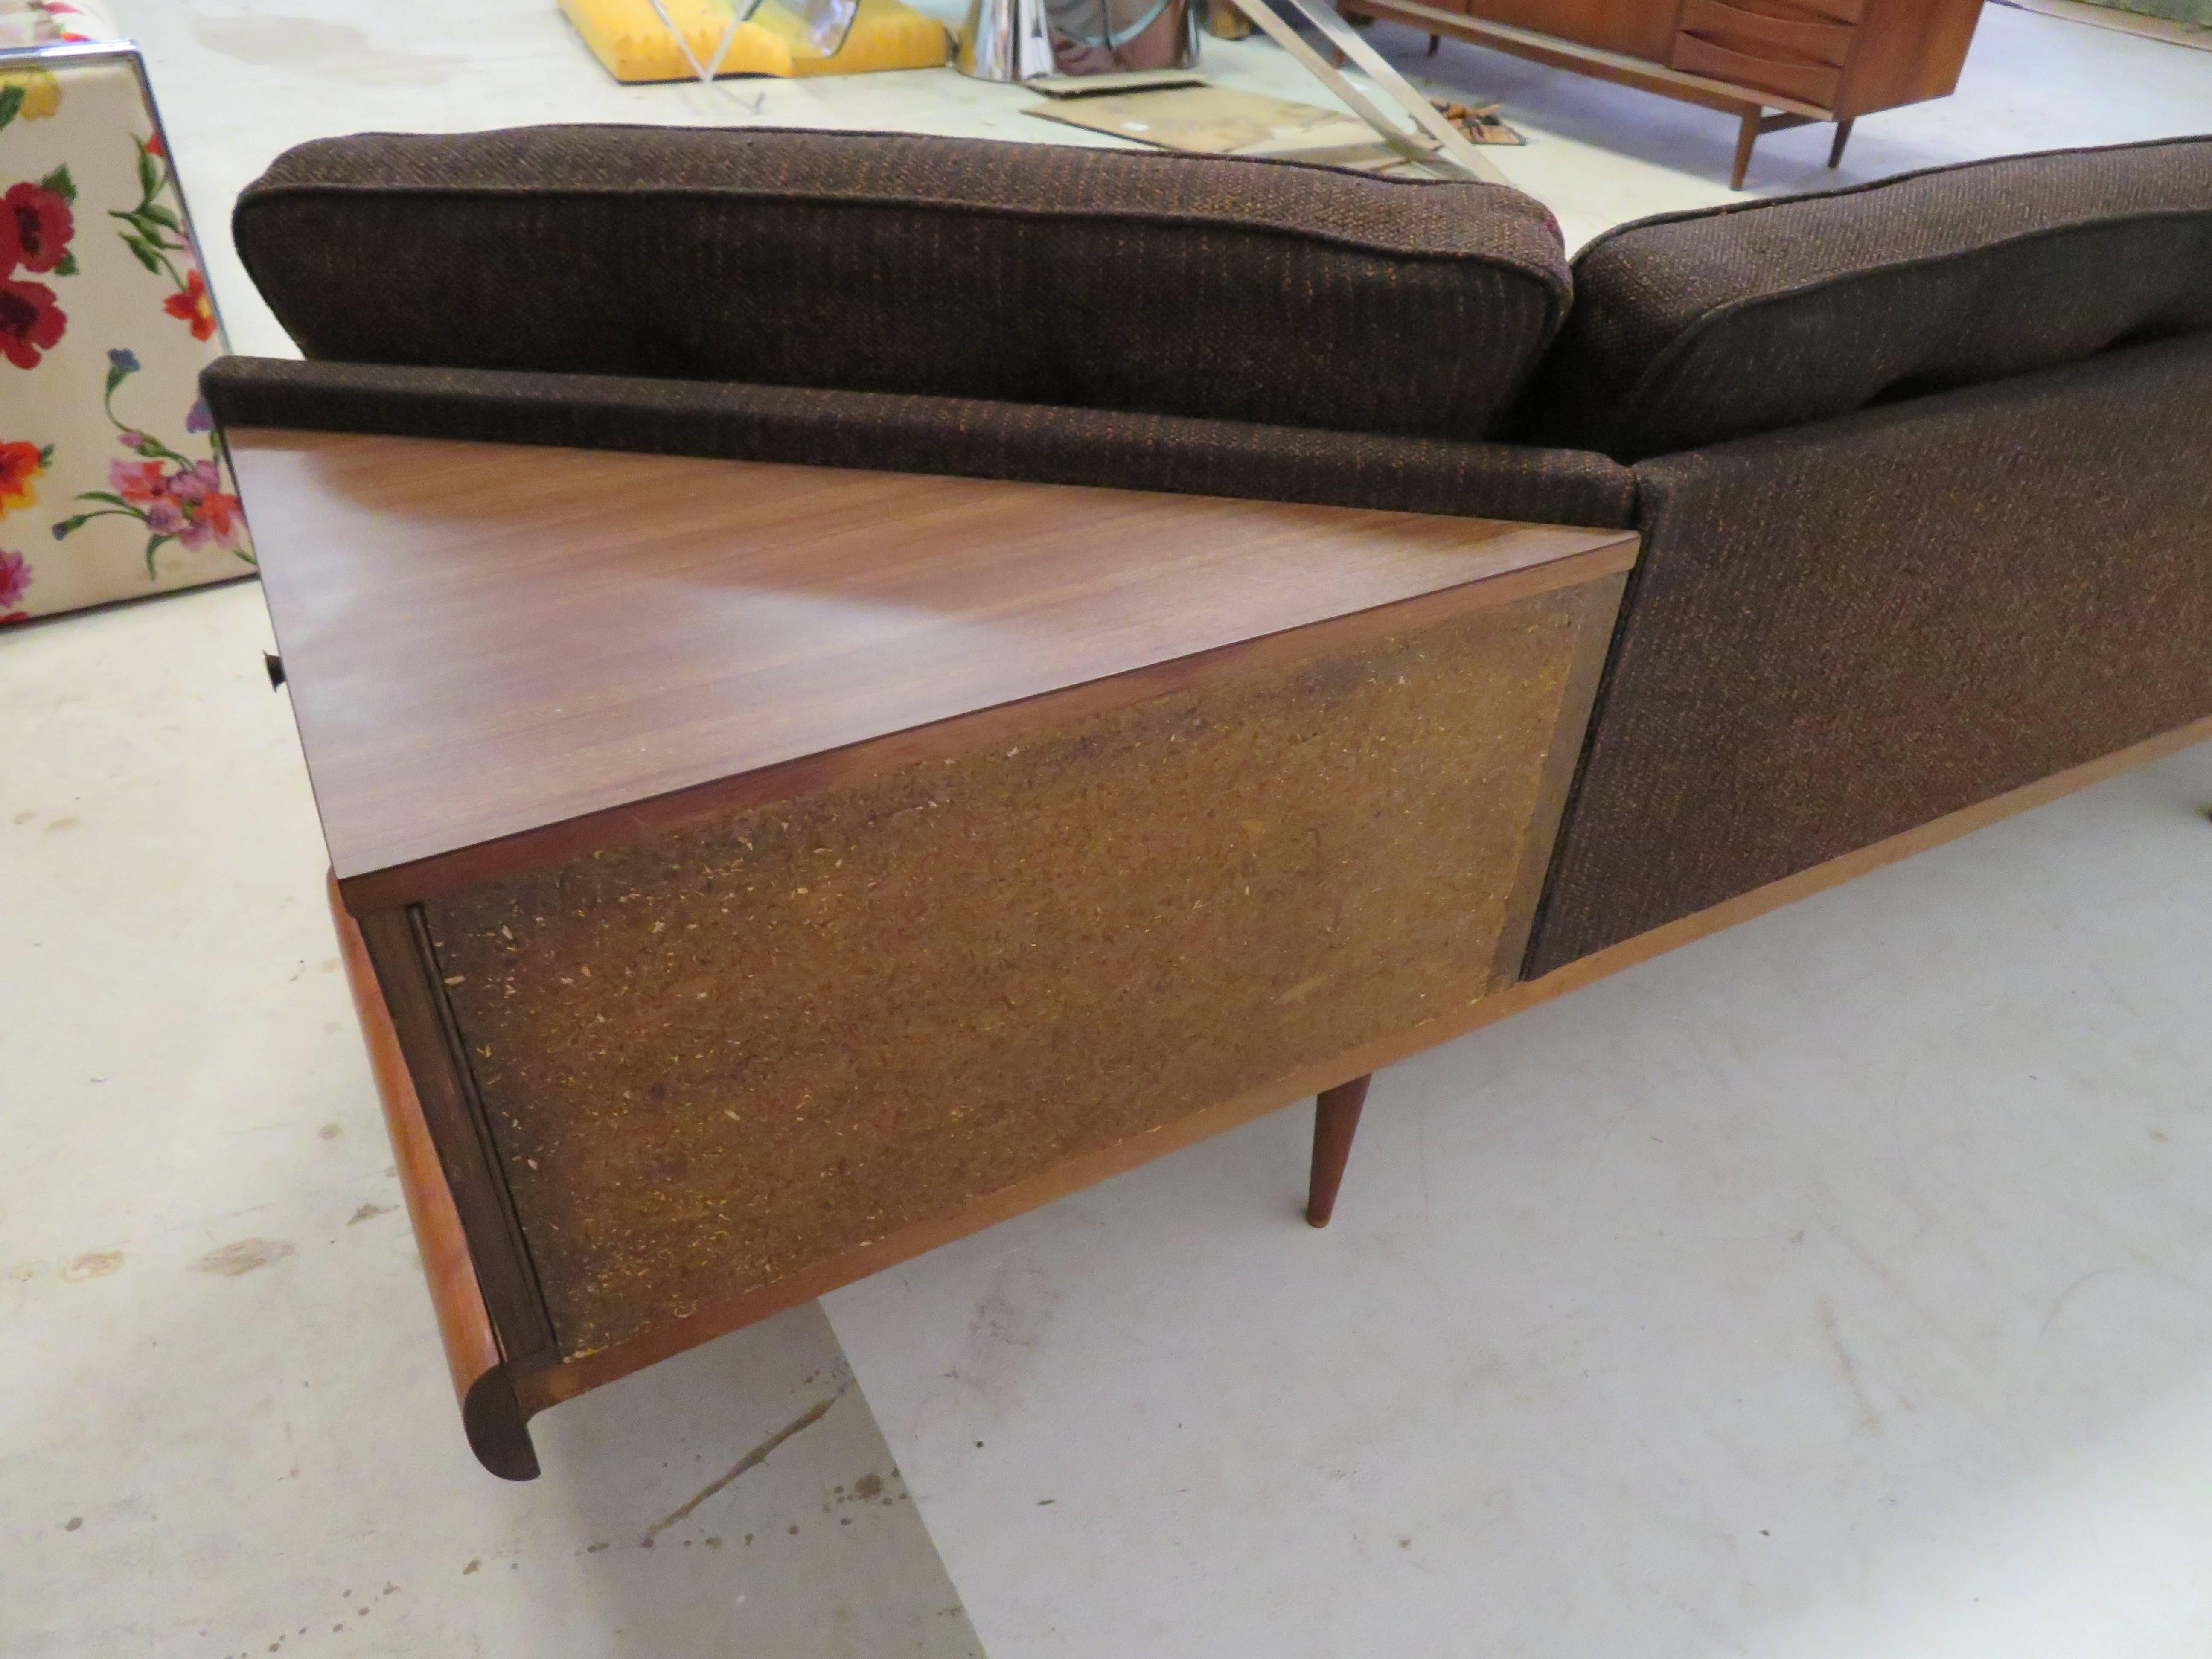 Upholstery Unusual Two-Piece Adrian Pearsall Sofa Sectional Boomerang Mid-Century Modern For Sale